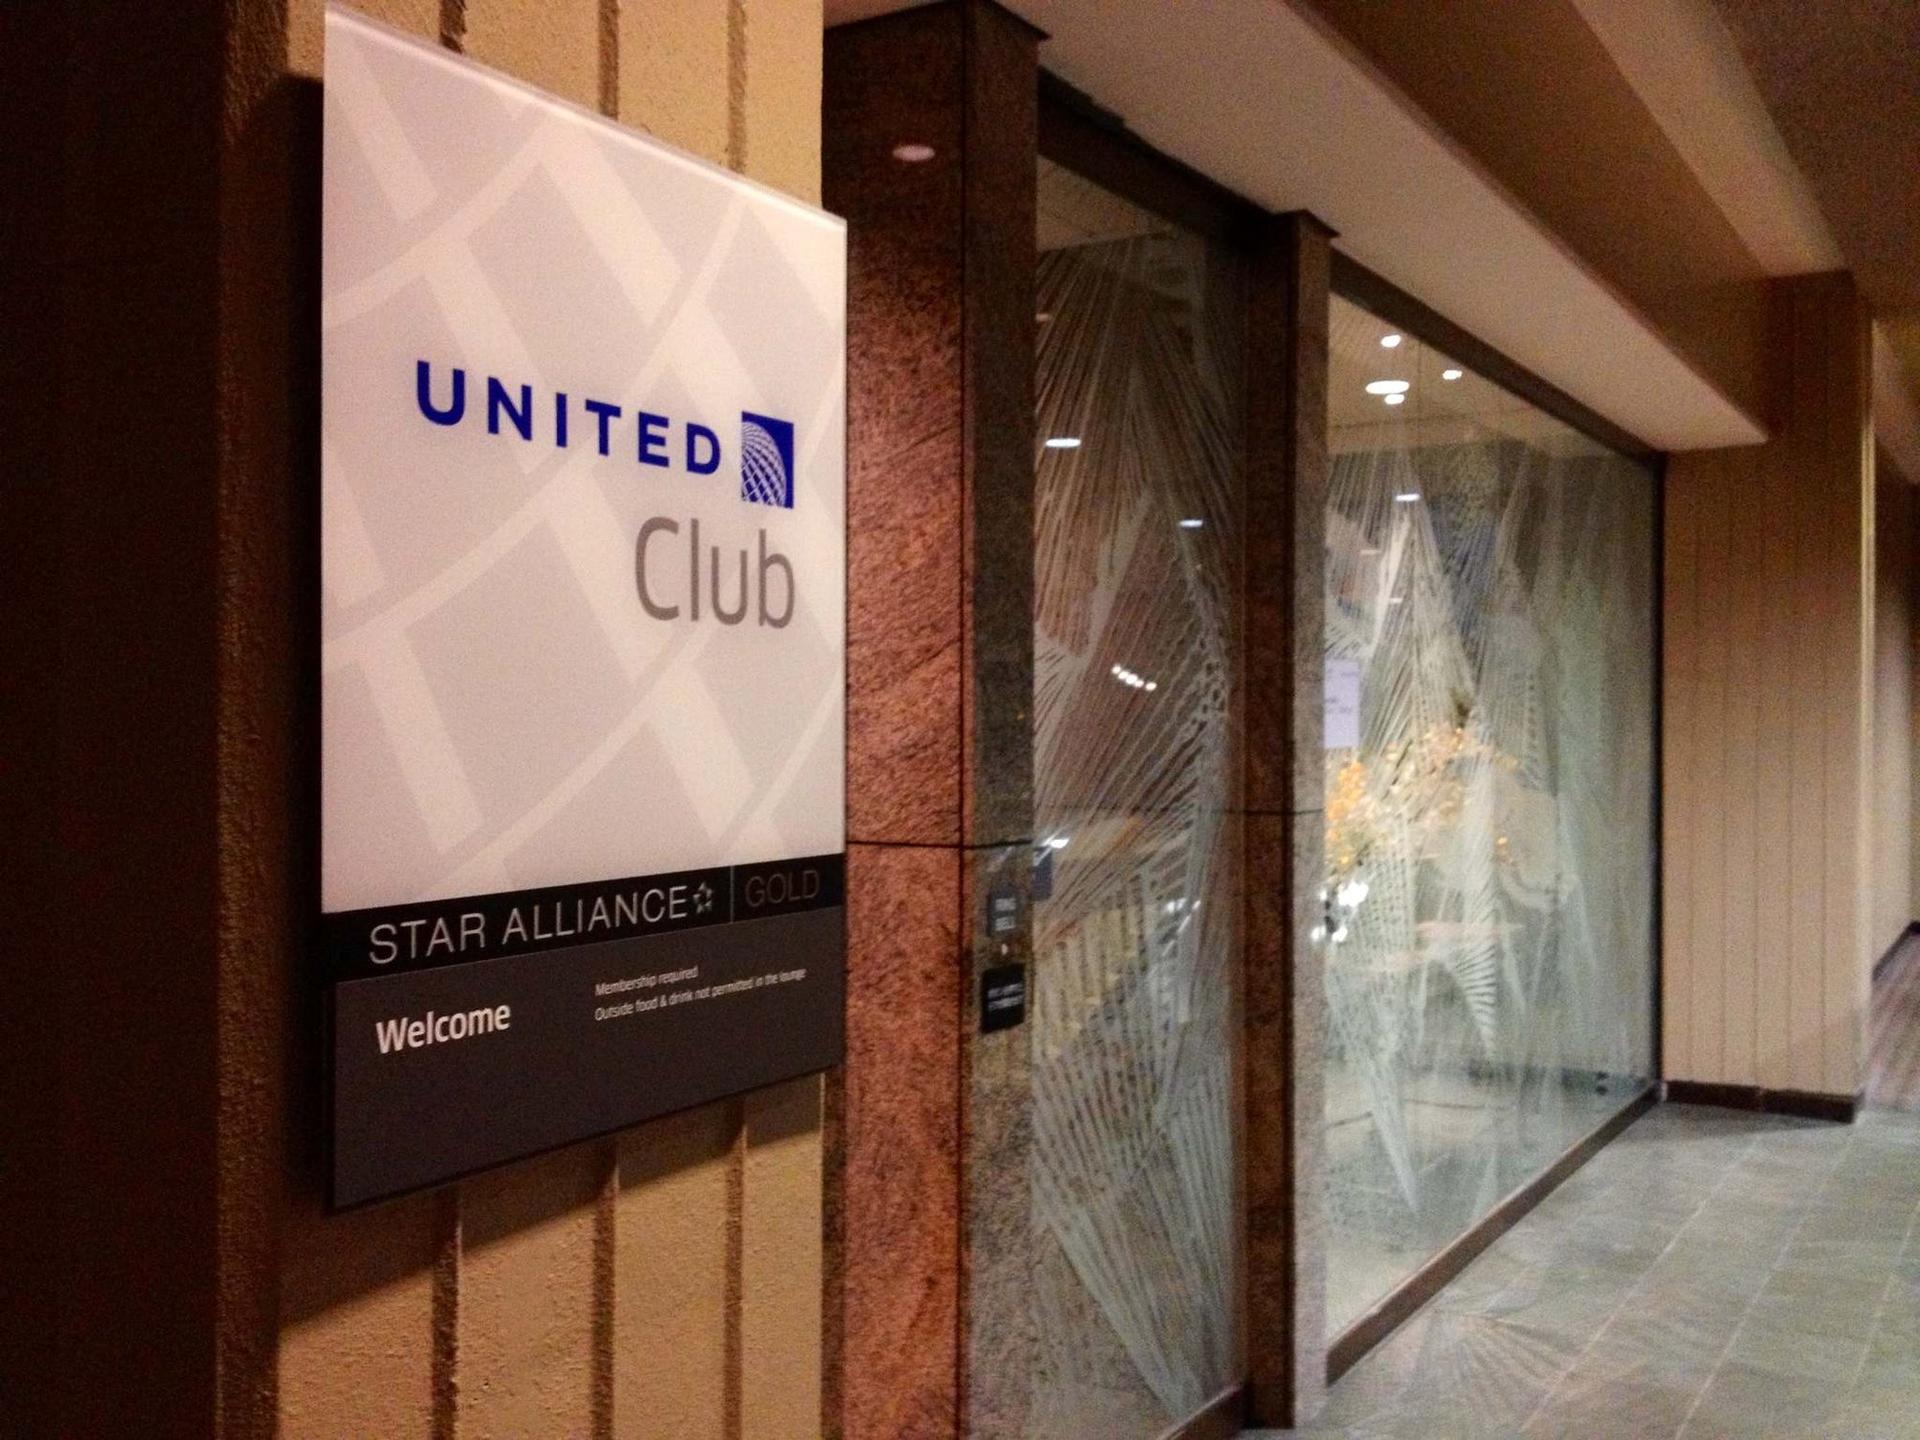 United Airlines United Club image 36 of 37